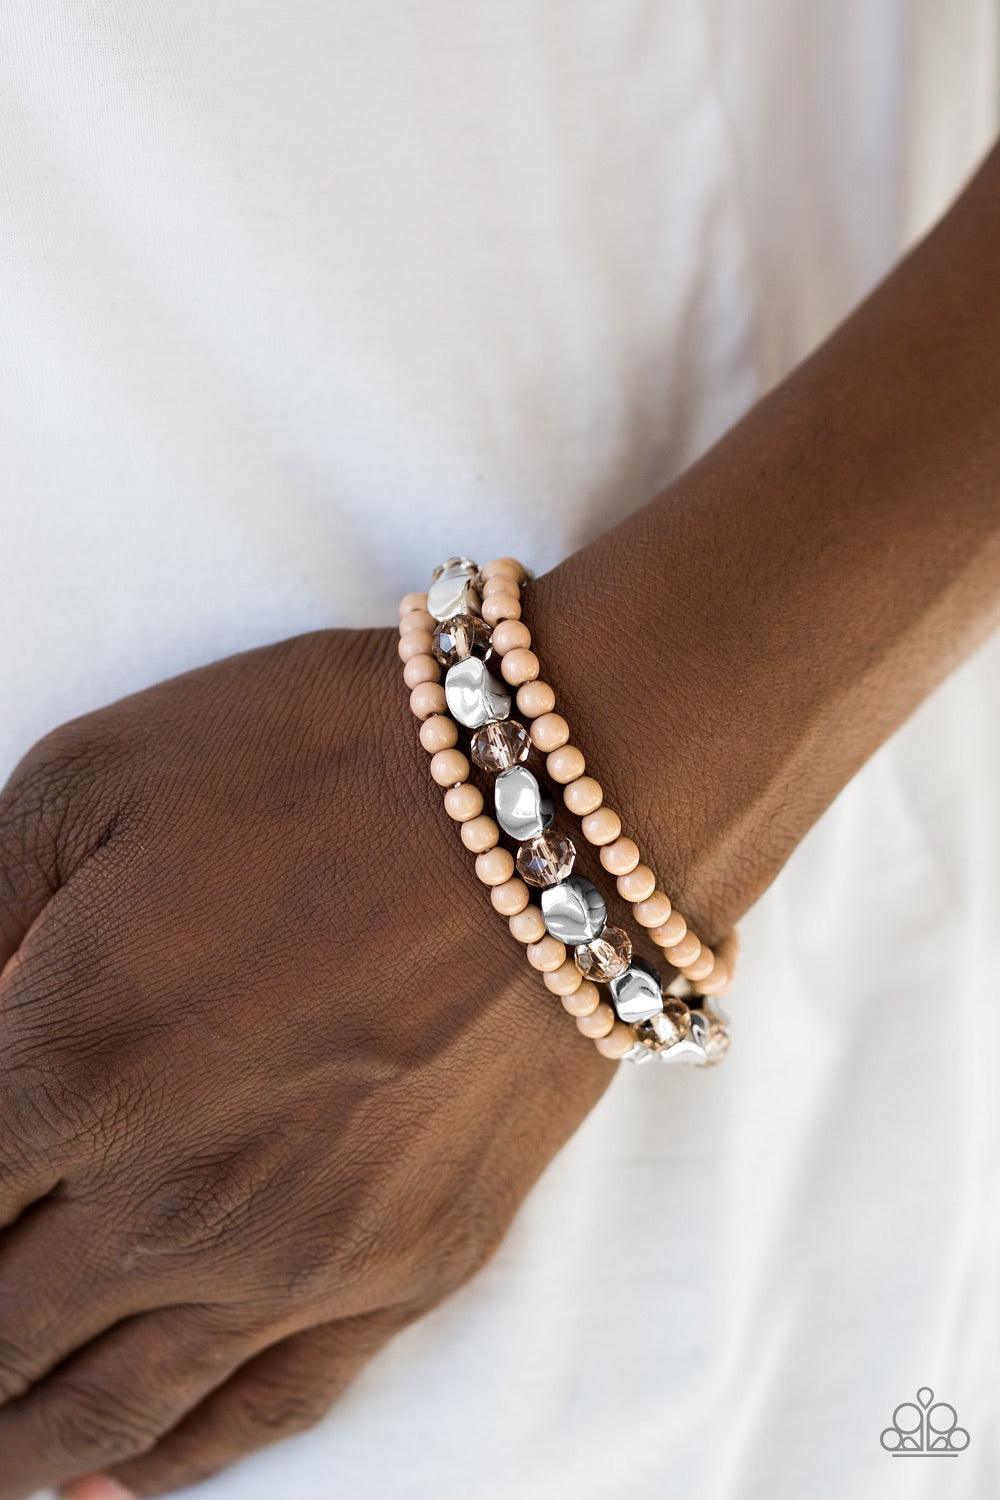 Paparazzi Accessories Beaded Bravado - Brown Varying in shape and shimmer, faceted silver beads, dainty brown beads, and glittery crystal-like beads are threaded along elastic stretchy bands, creating colorful layers across the wrist. Jewelry